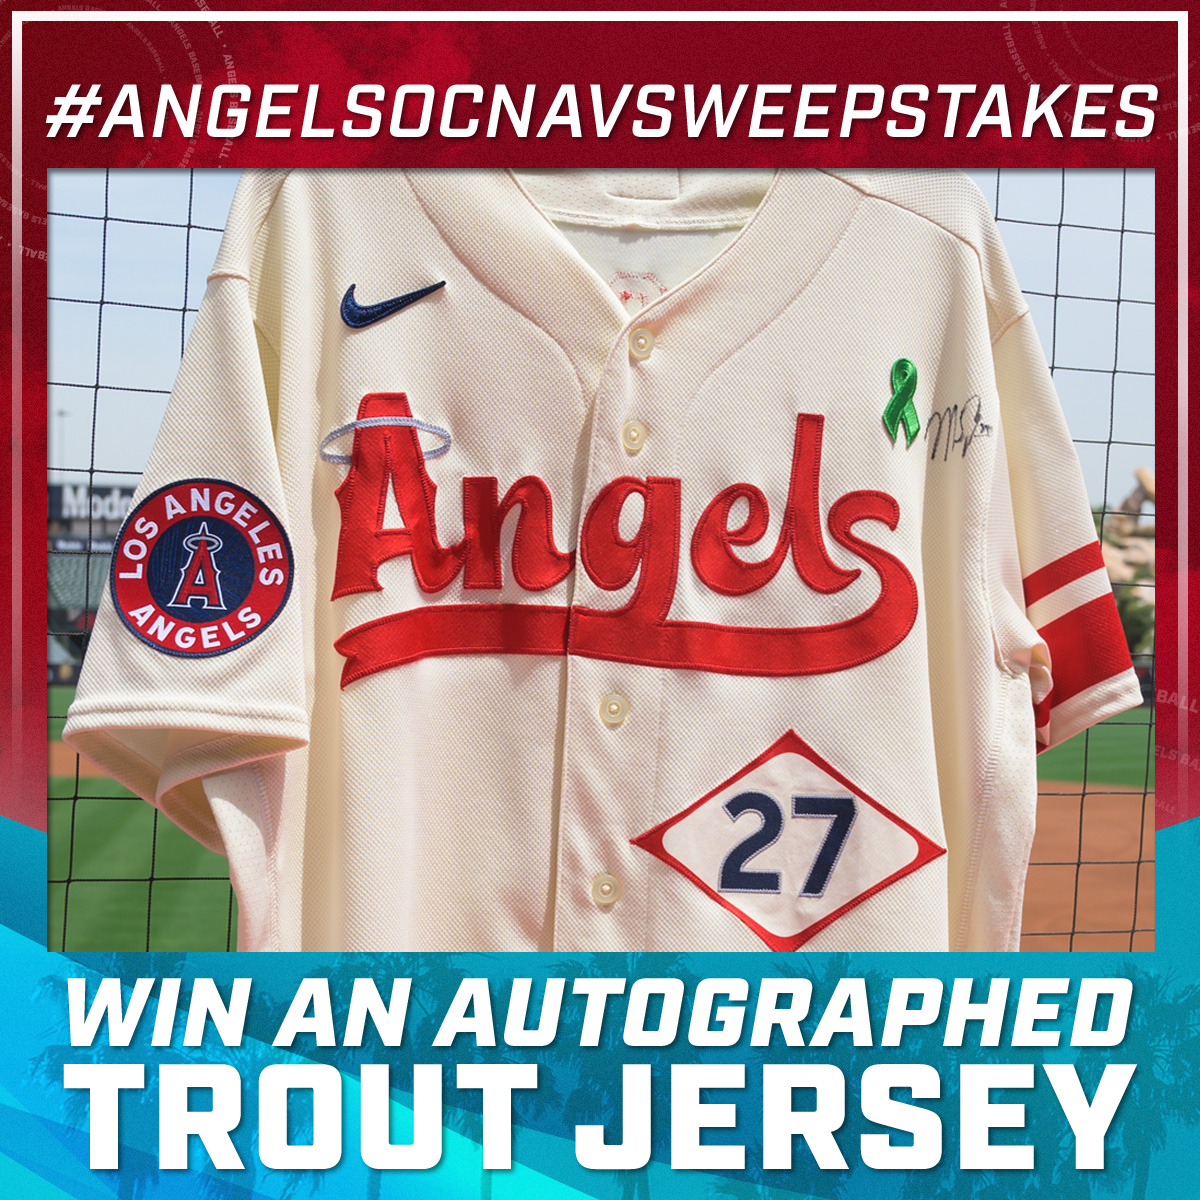 Los Angeles Angels on X: 🚨Sweepstakes ends tomorrow🚨 Enter the  #AngelsOCNavSweepstakes before 11:59pm PT on 9/8 for your chance to win an  autographed Trout jersey! See below for details. / X